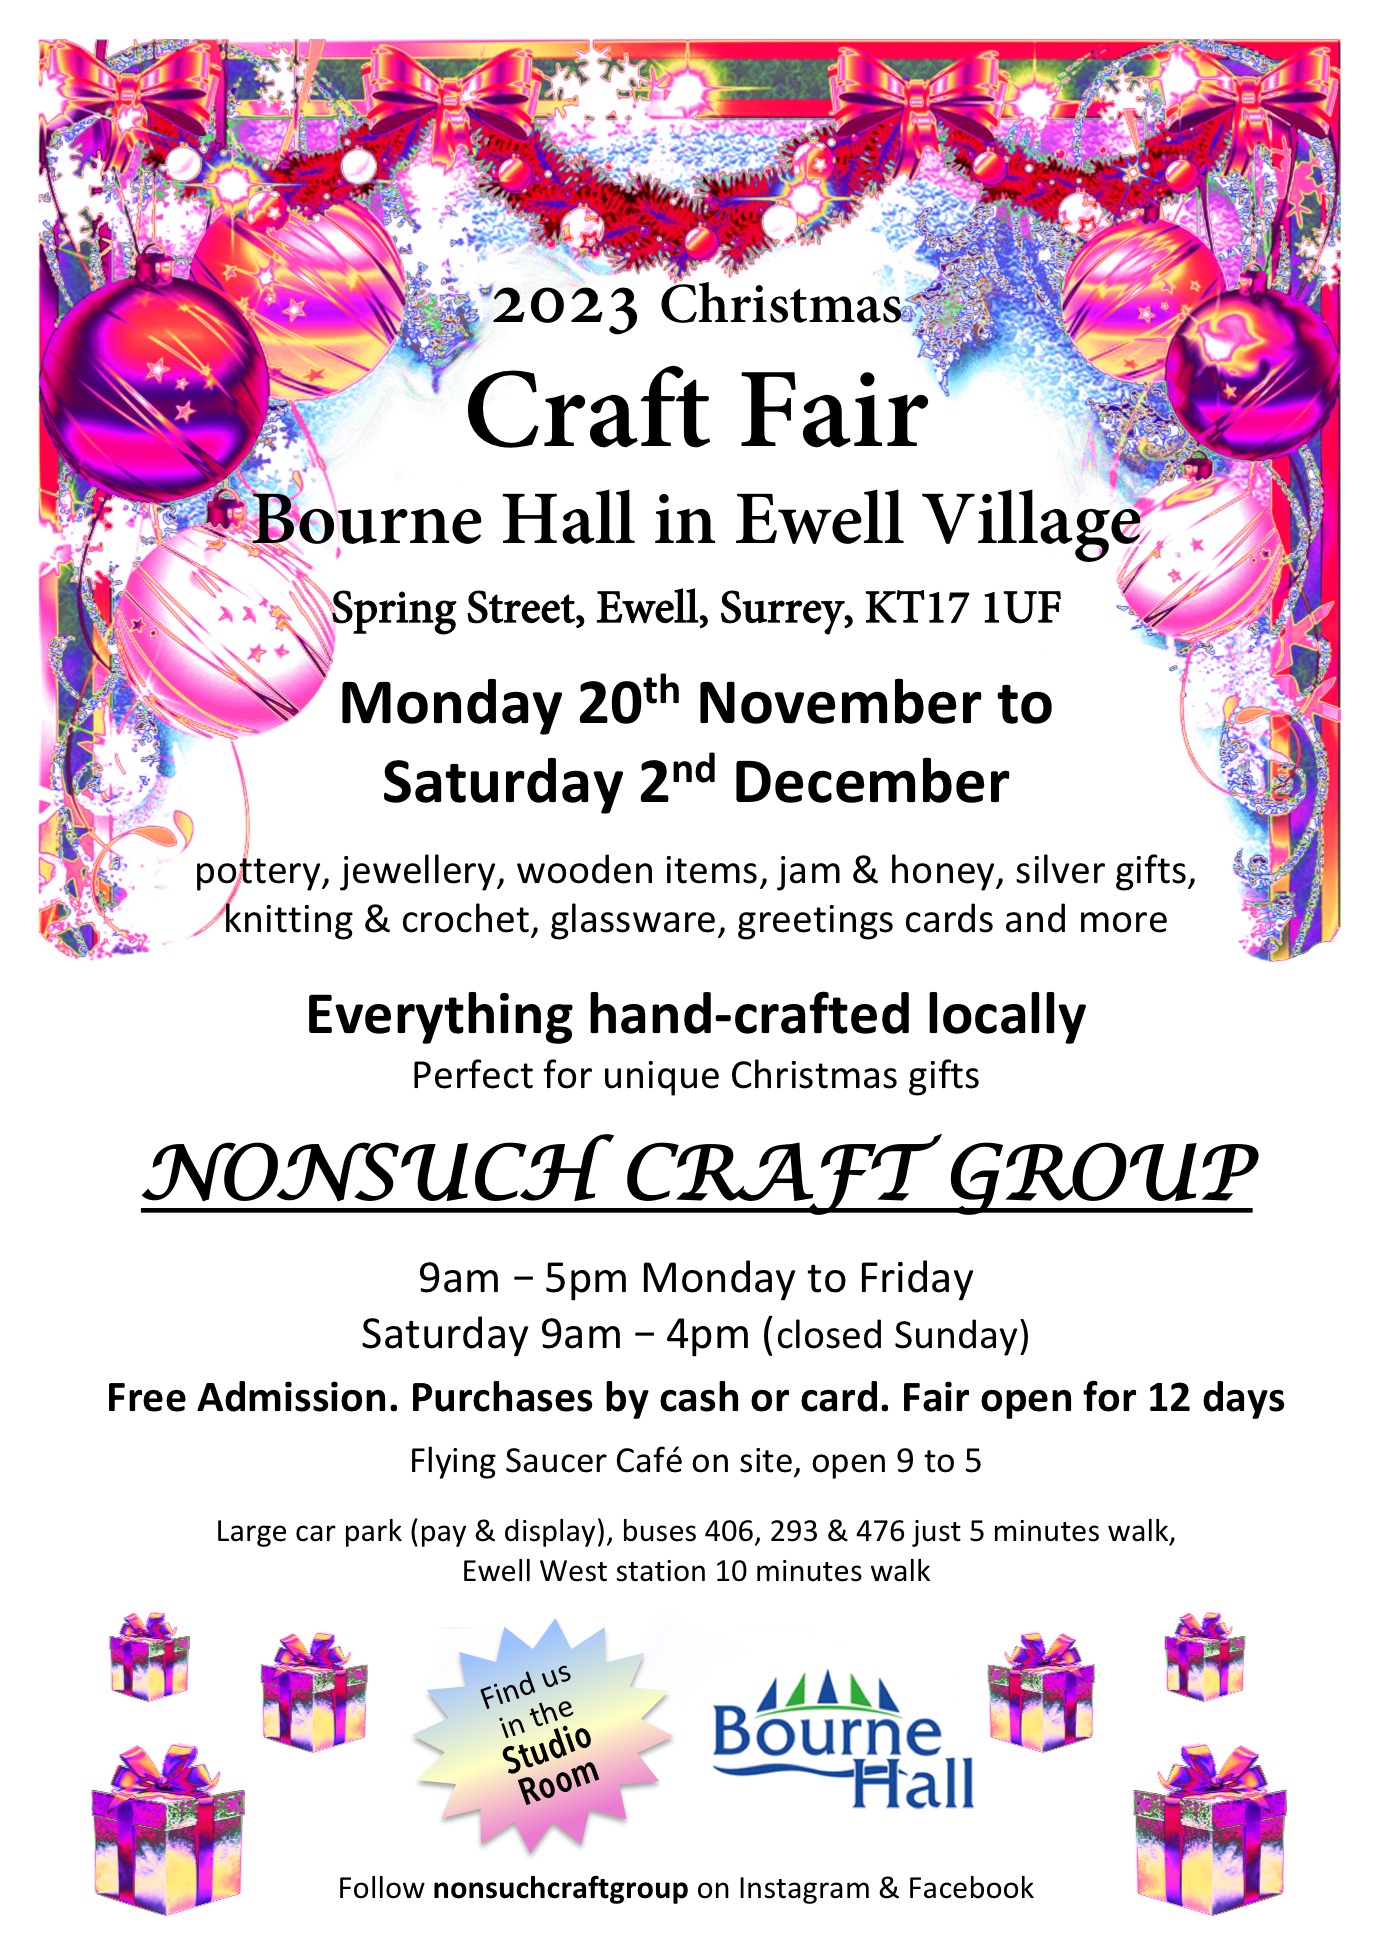 Nonsuch Craft Group Christmas Fair